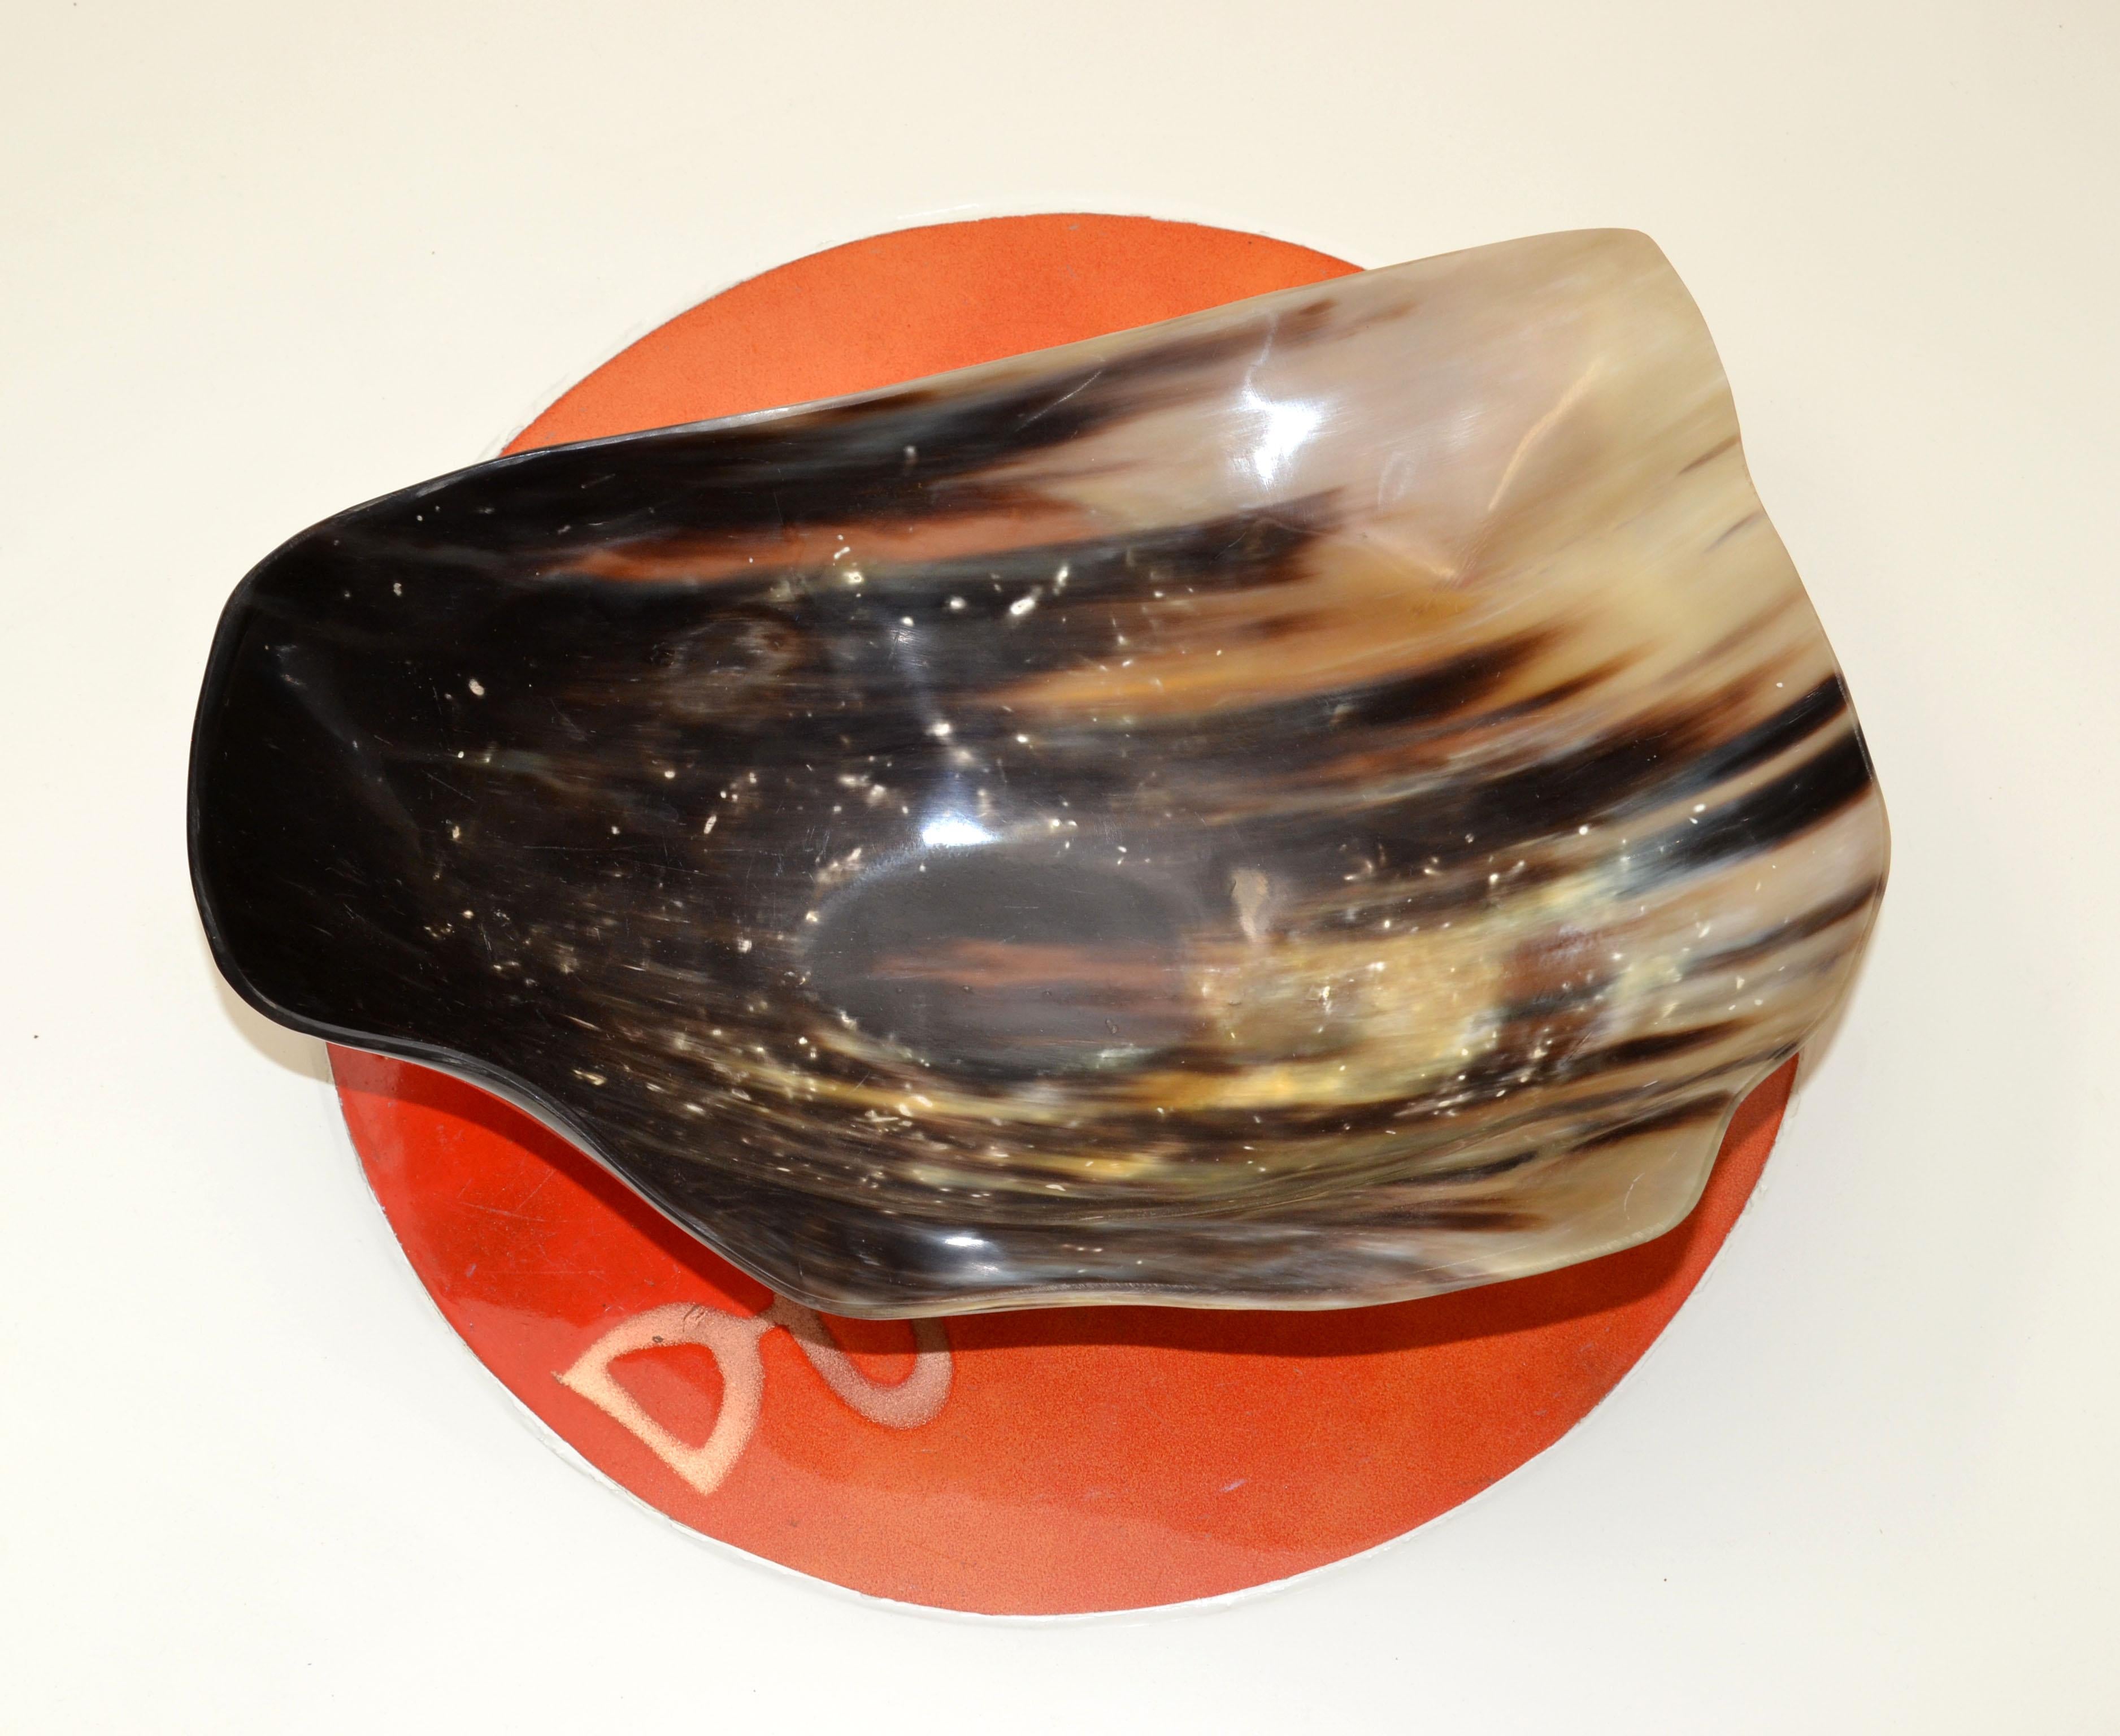 Hand-Crafted Polished Handmade Horn Bowl, Catchall, Vessel, Centerpiece Mid-Century Modern For Sale